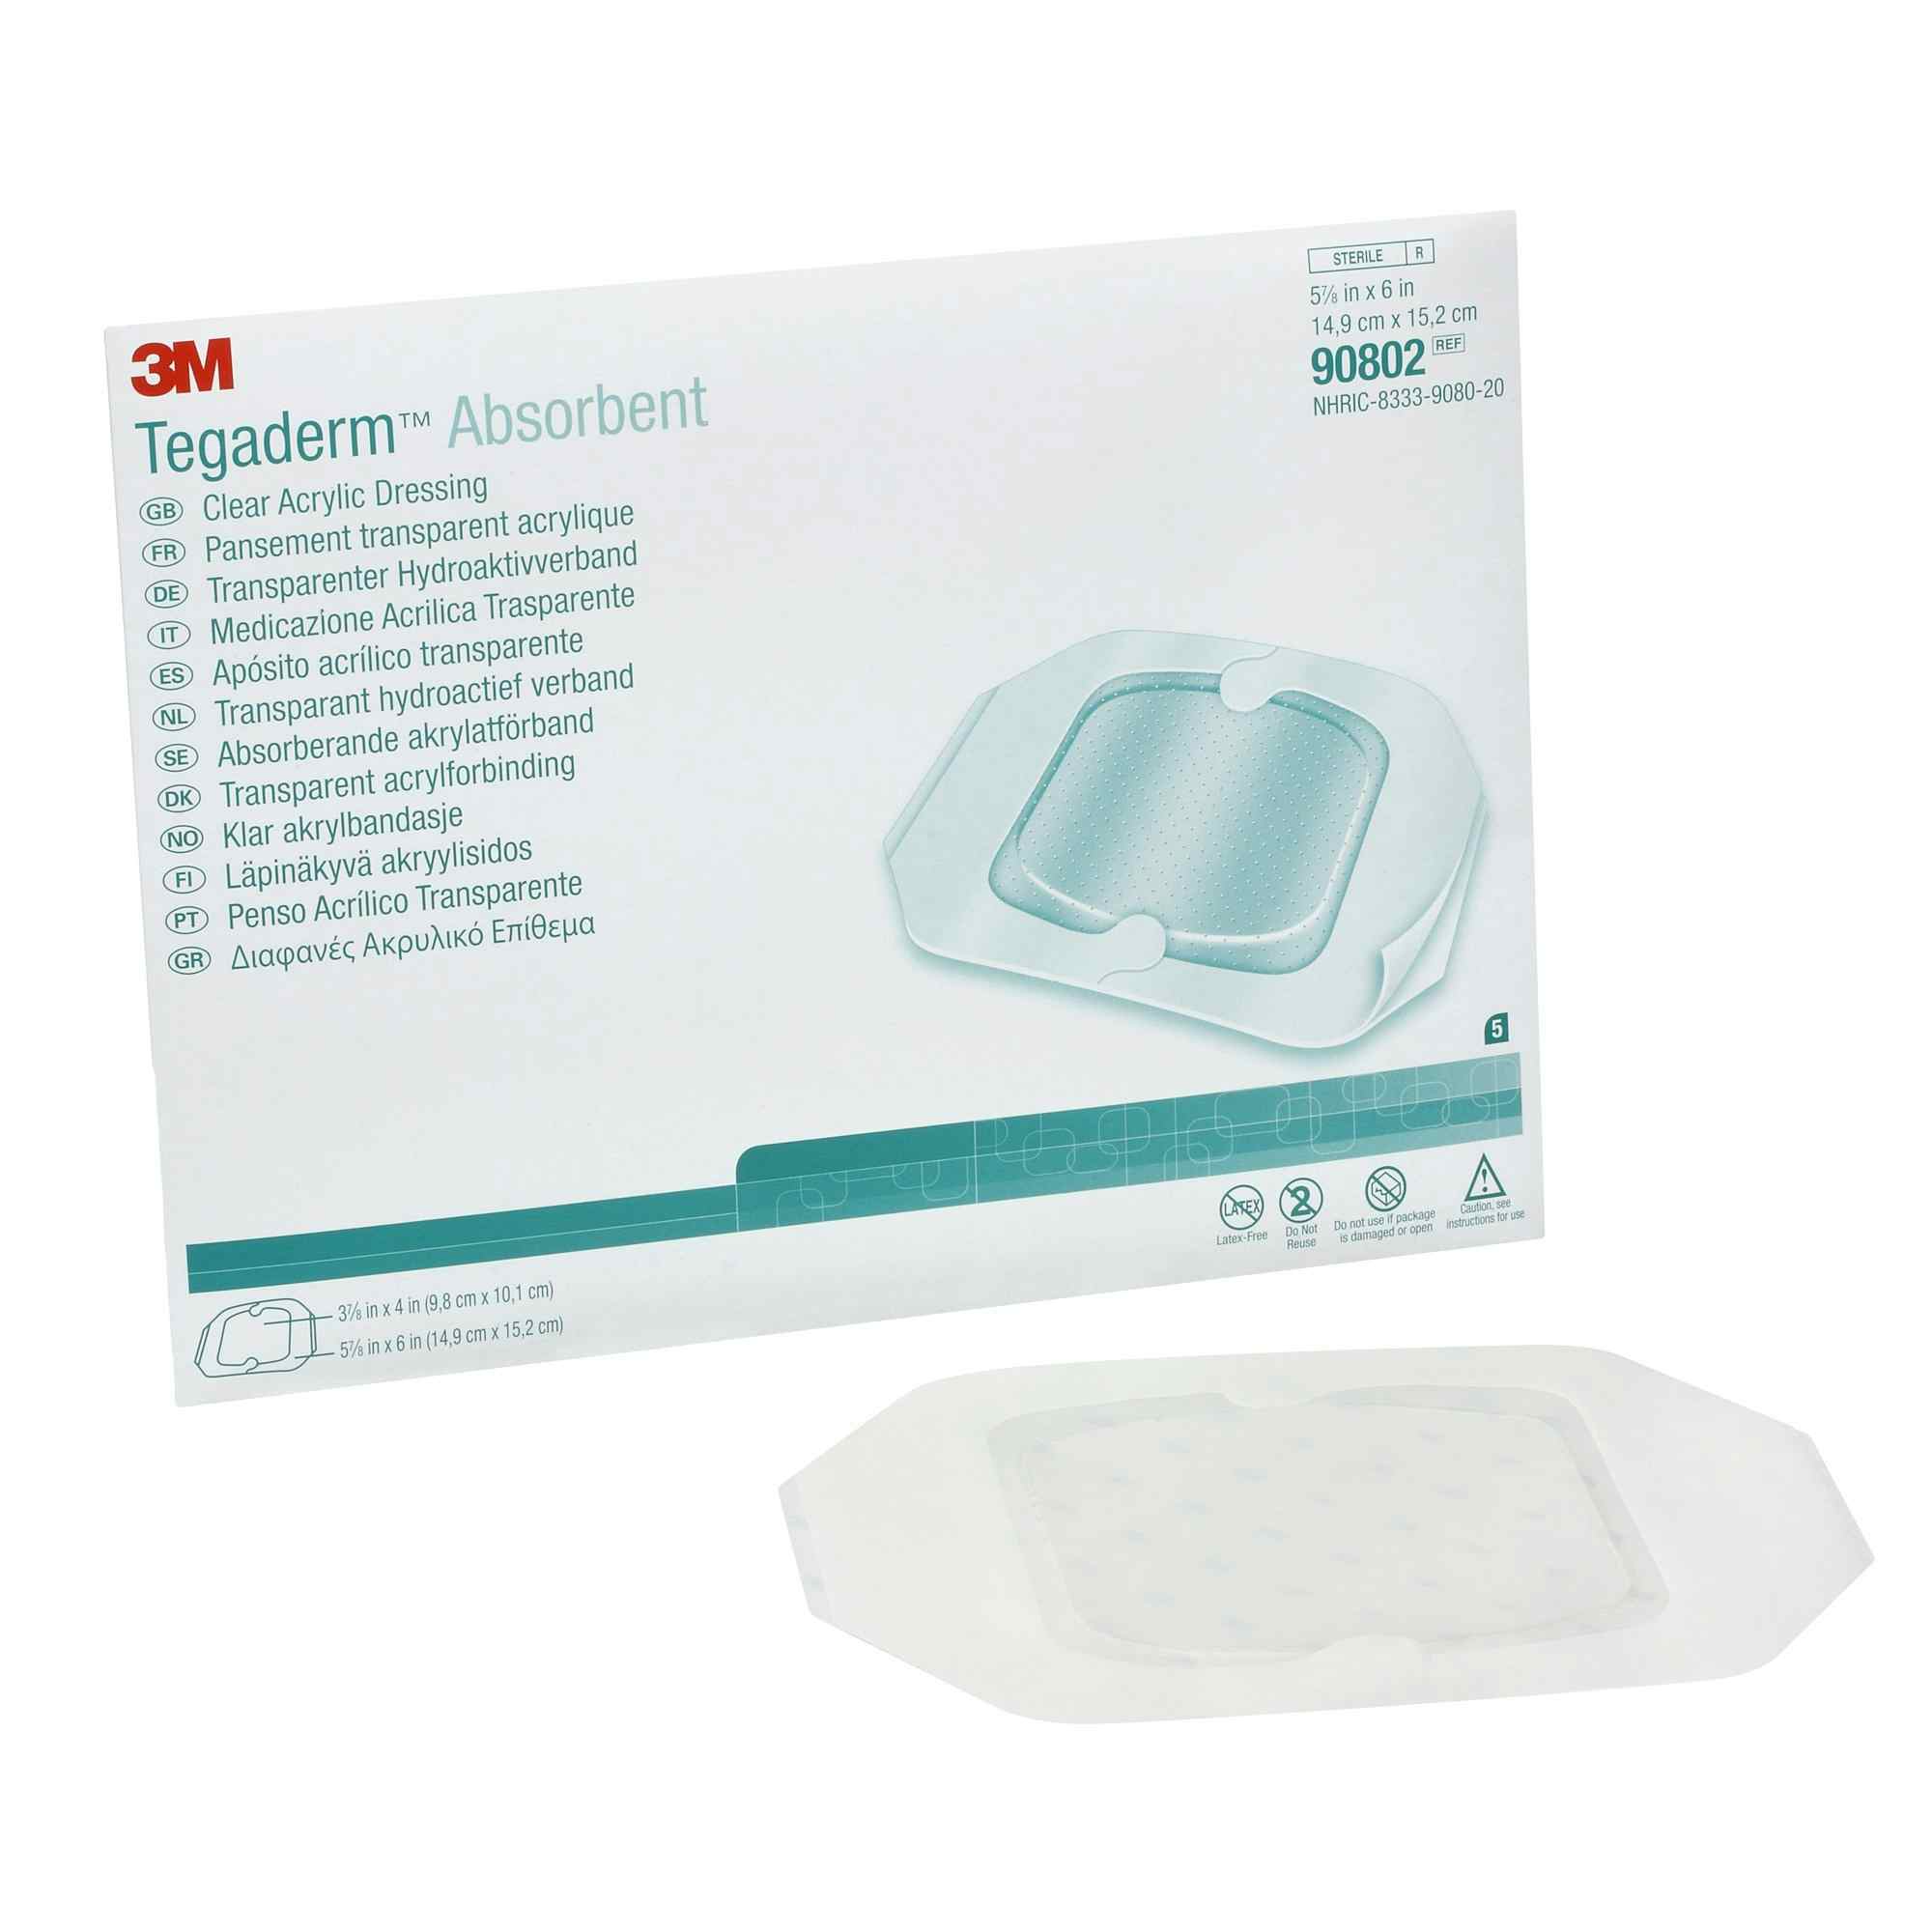 3M Tegaderm Absorbent Clear Acrylic Dressing, 5-7/8 X 6", 90802, Box of 5